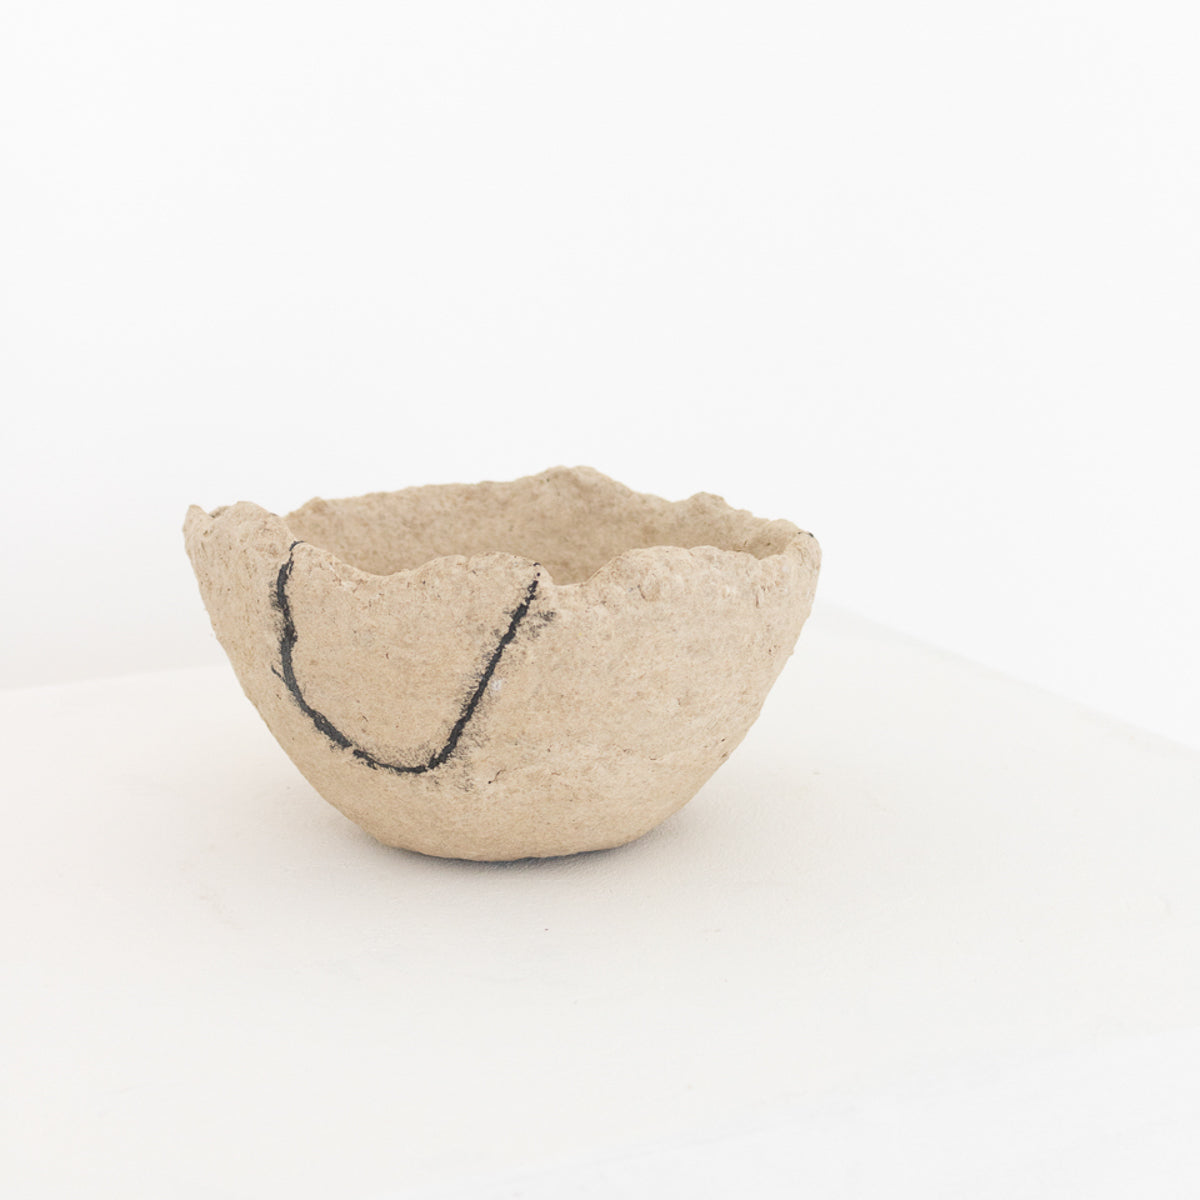 Handmade by Montana artist Jennifer Alden Design, Vessel Study No. 47 is a contemporary sculpture made from paper clay and charcoal. Each unique vessel in this collection is one-of-a-kind, rare, and both primitive and modern. 